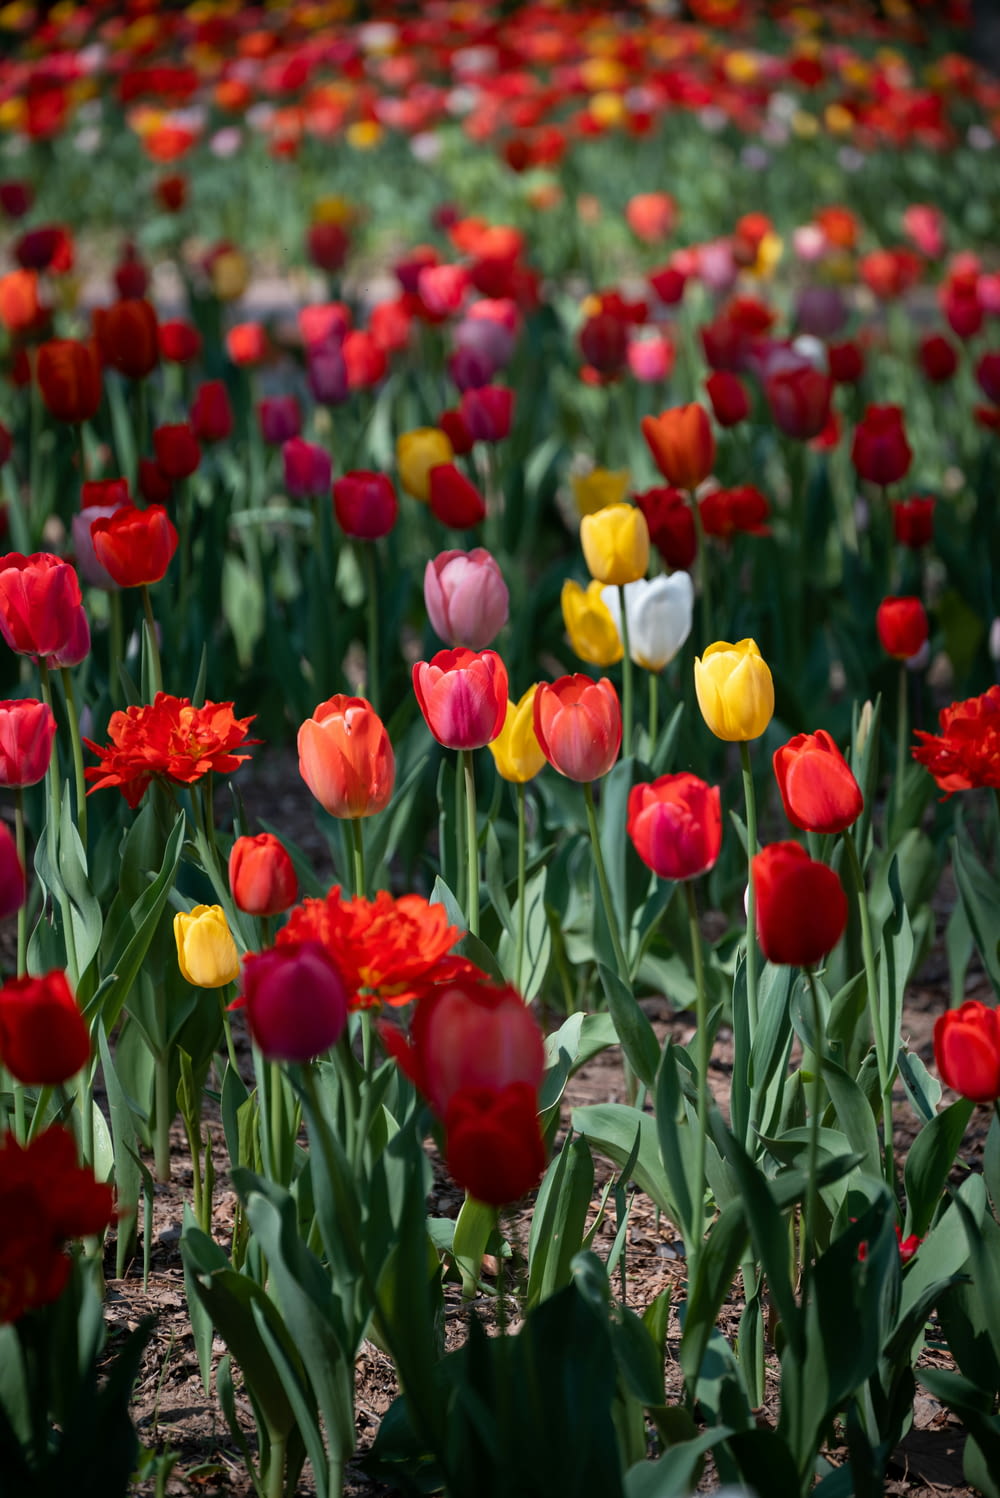 a field full of red, yellow, and white tulips